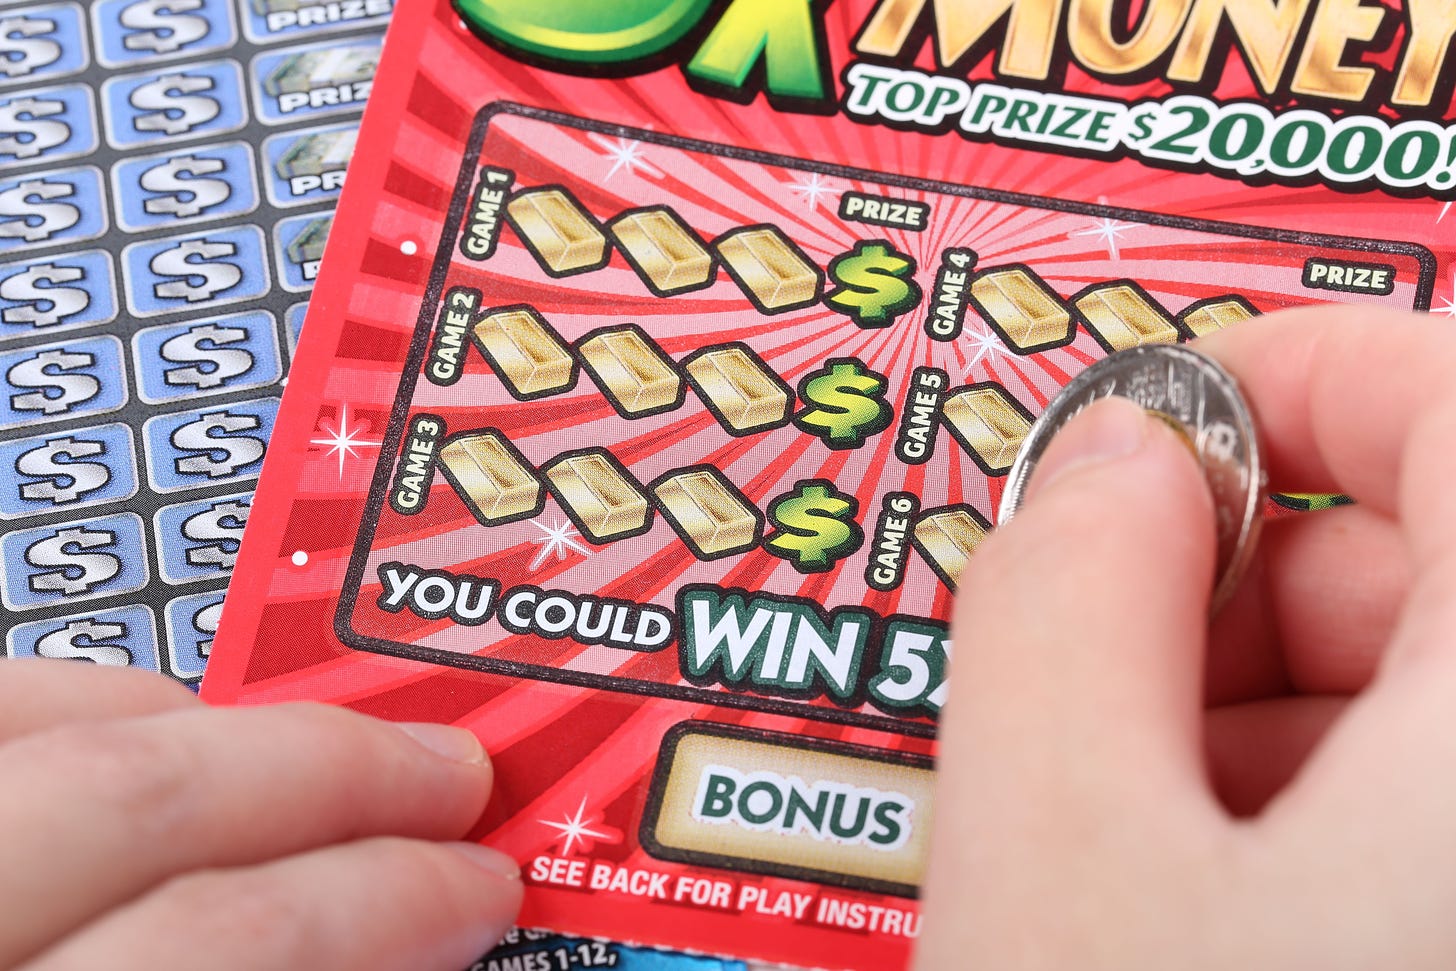 Stealing lottery tickets is usually a lot more trouble than it's worth ...